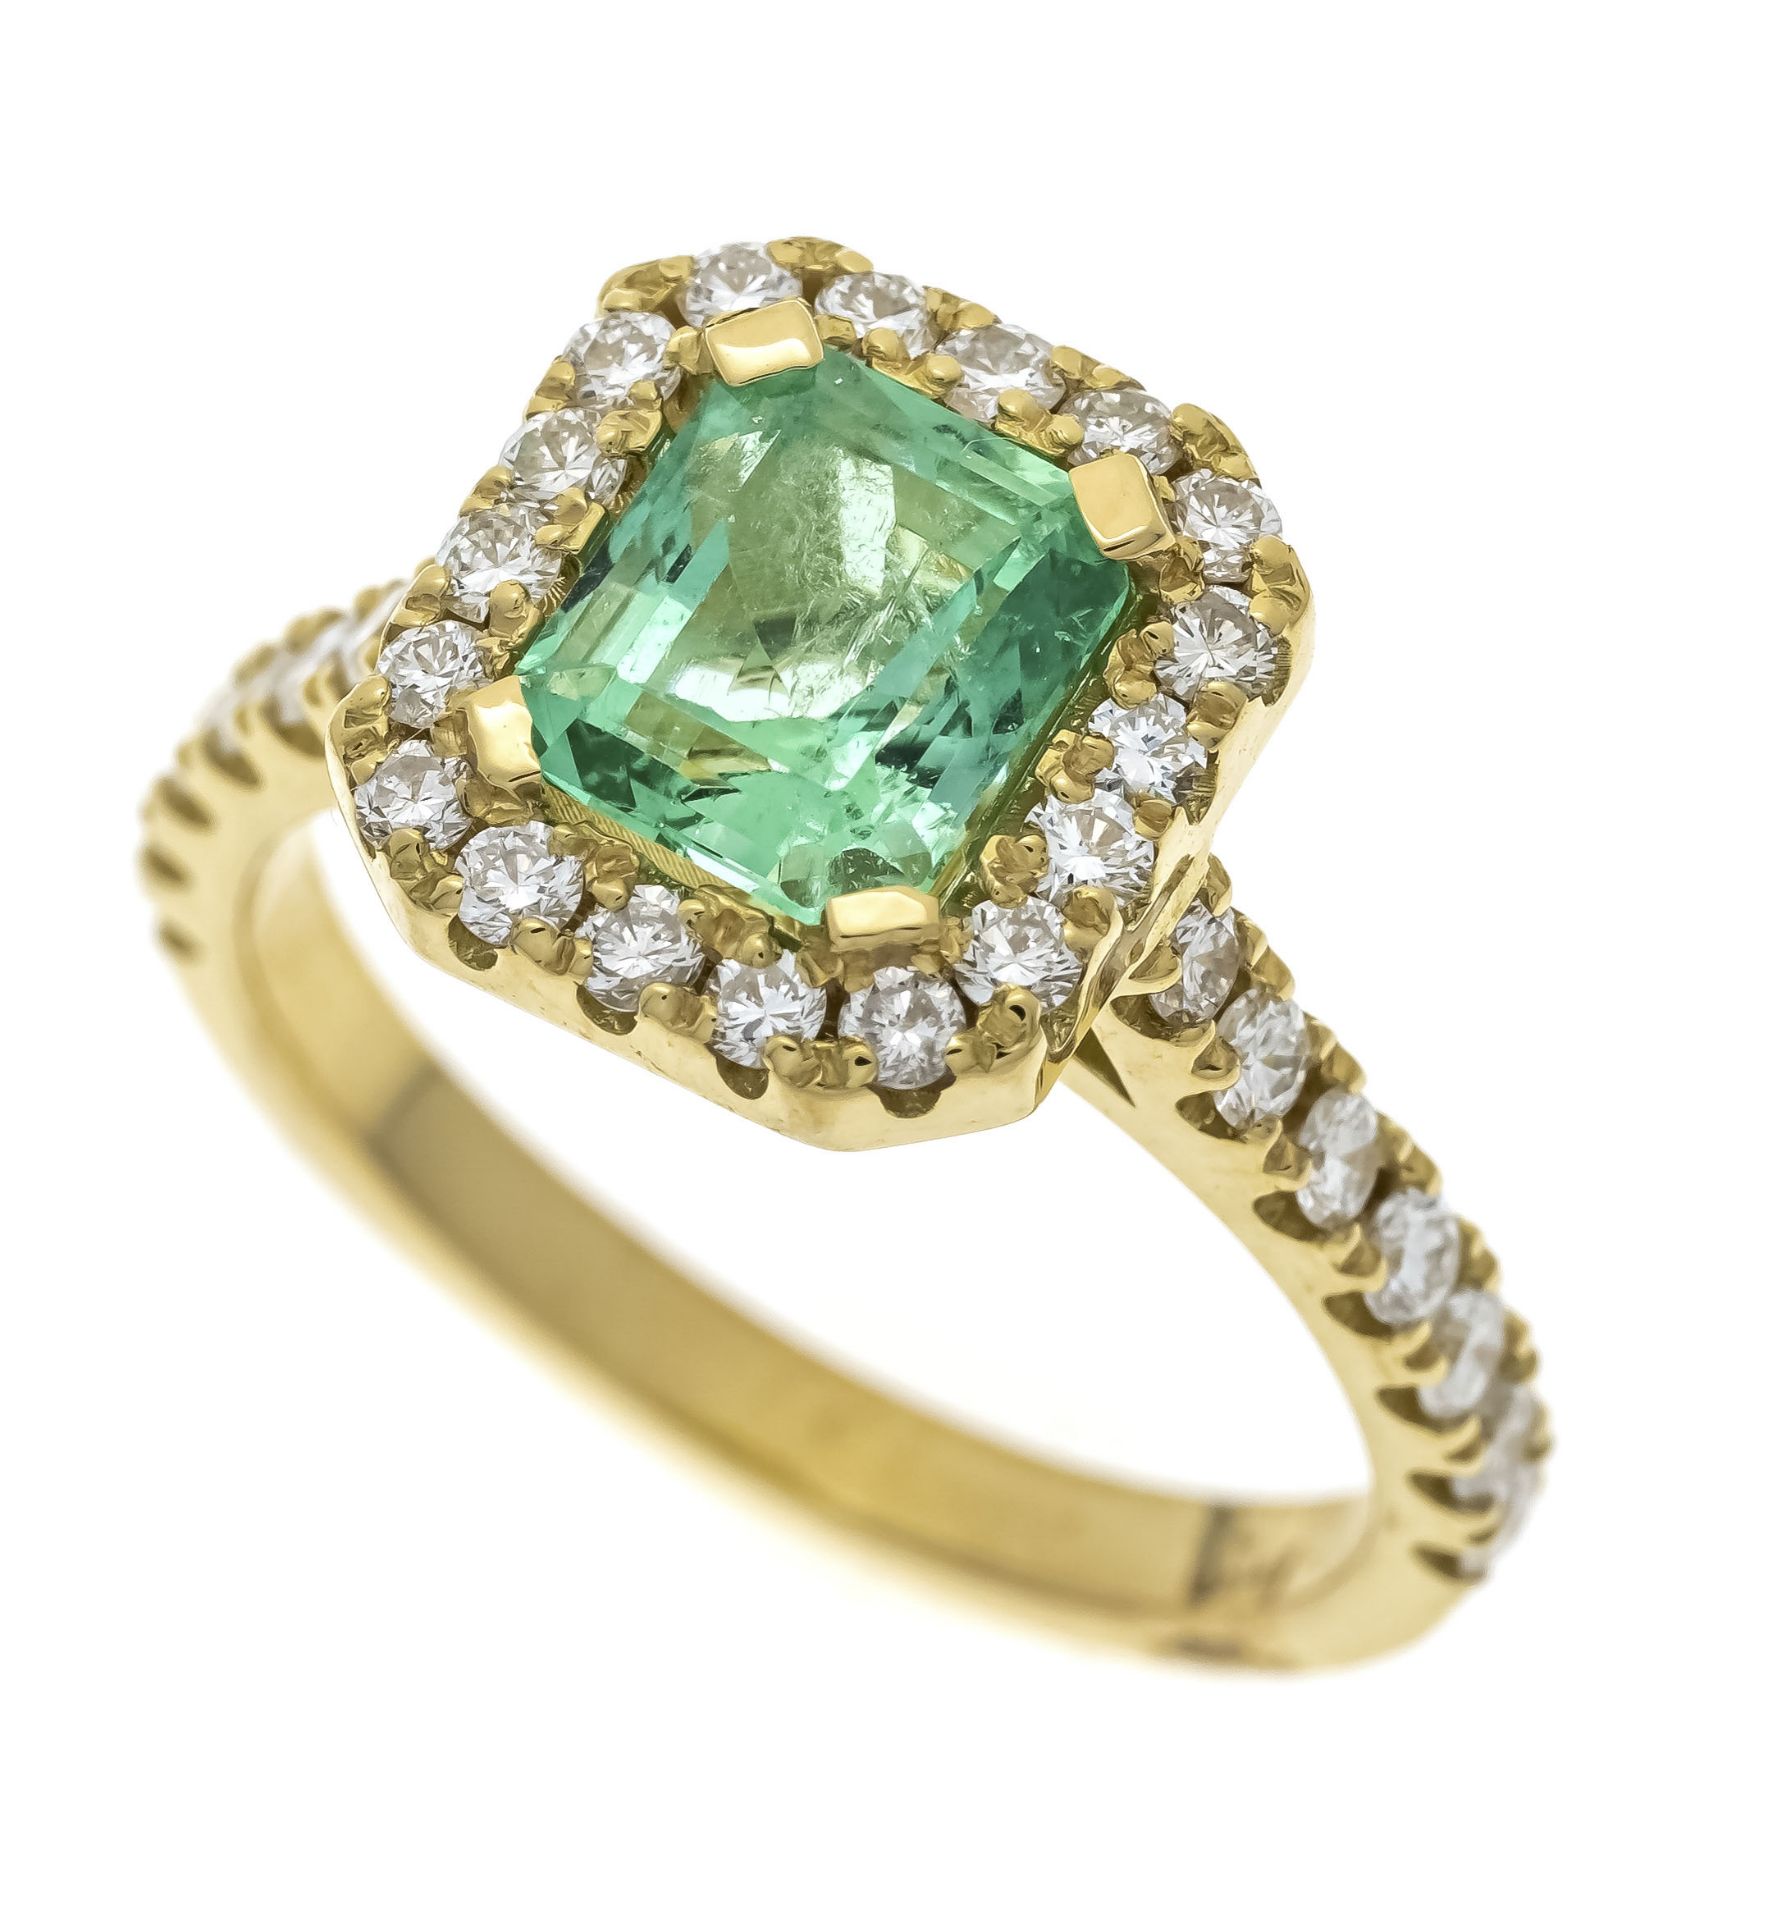 Emerald-brilliant ring GG 750/000 with a faceted Colombian emerald 1.27 ct in a luminous slightly